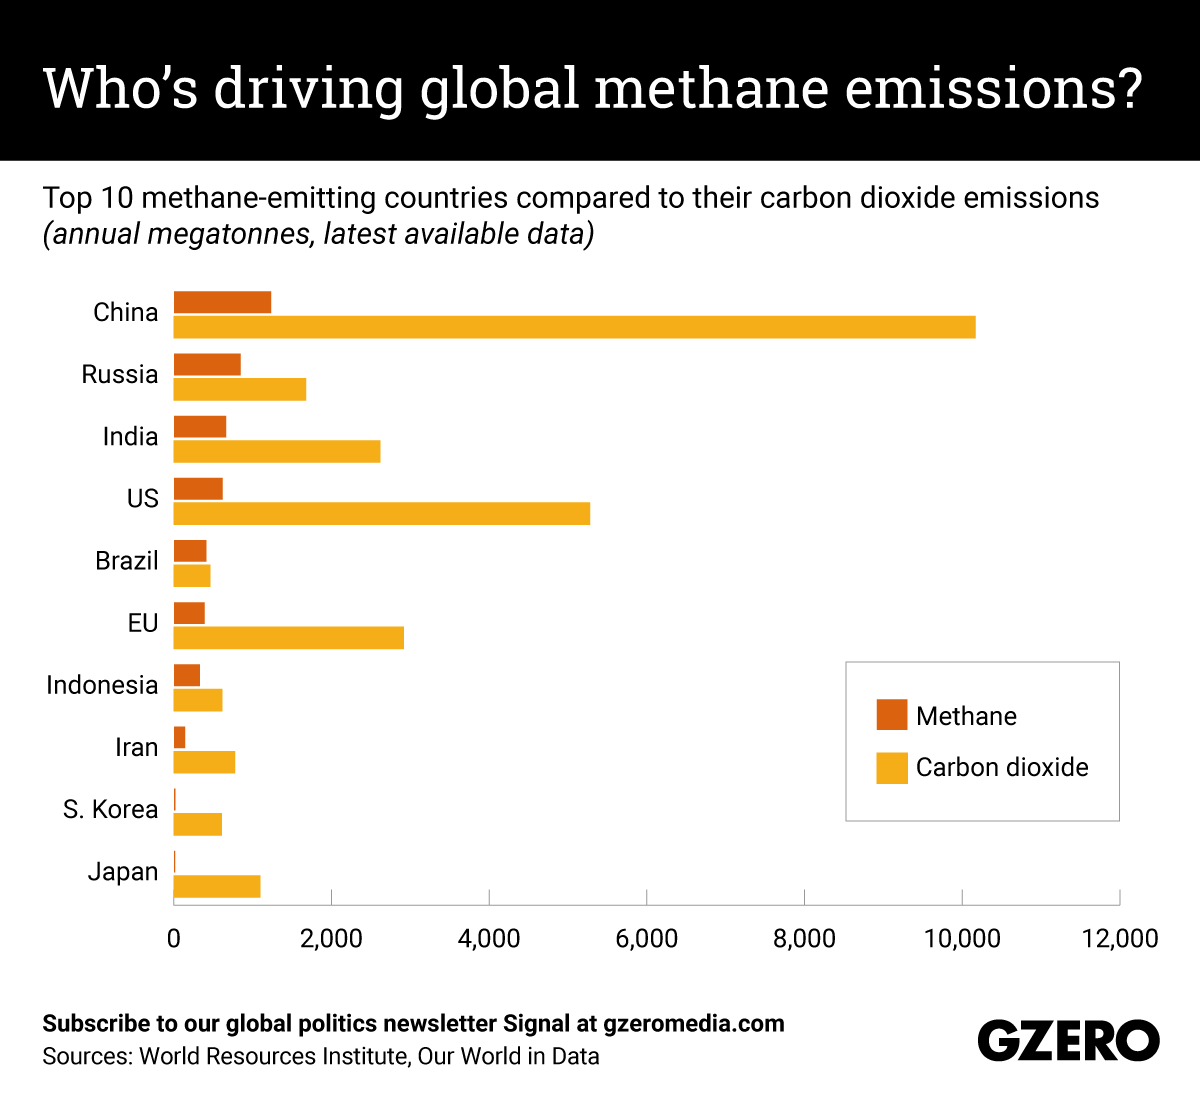 The Graphic Truth: Who's driving global methane emissions?